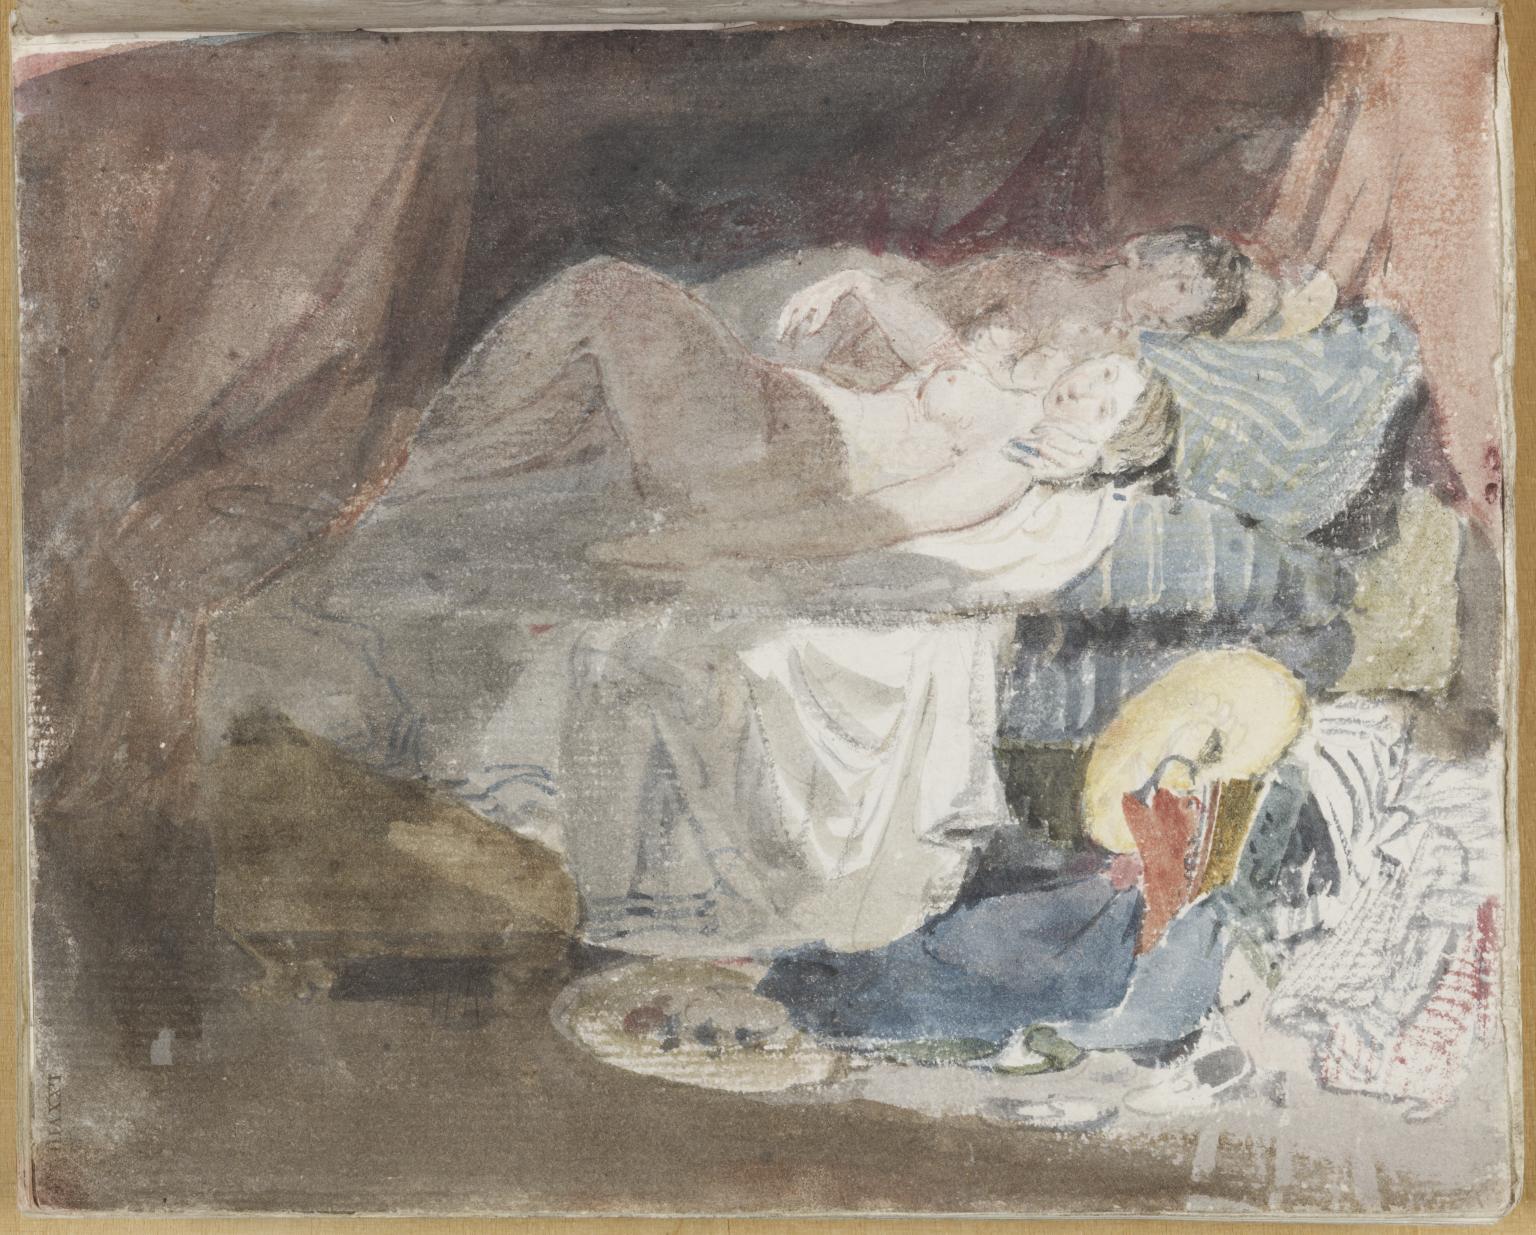 Nude Swiss Girl and Companion on a Bed, 1802, Joseph Mallord William Turner (1775-1851) © Tate, London 2017